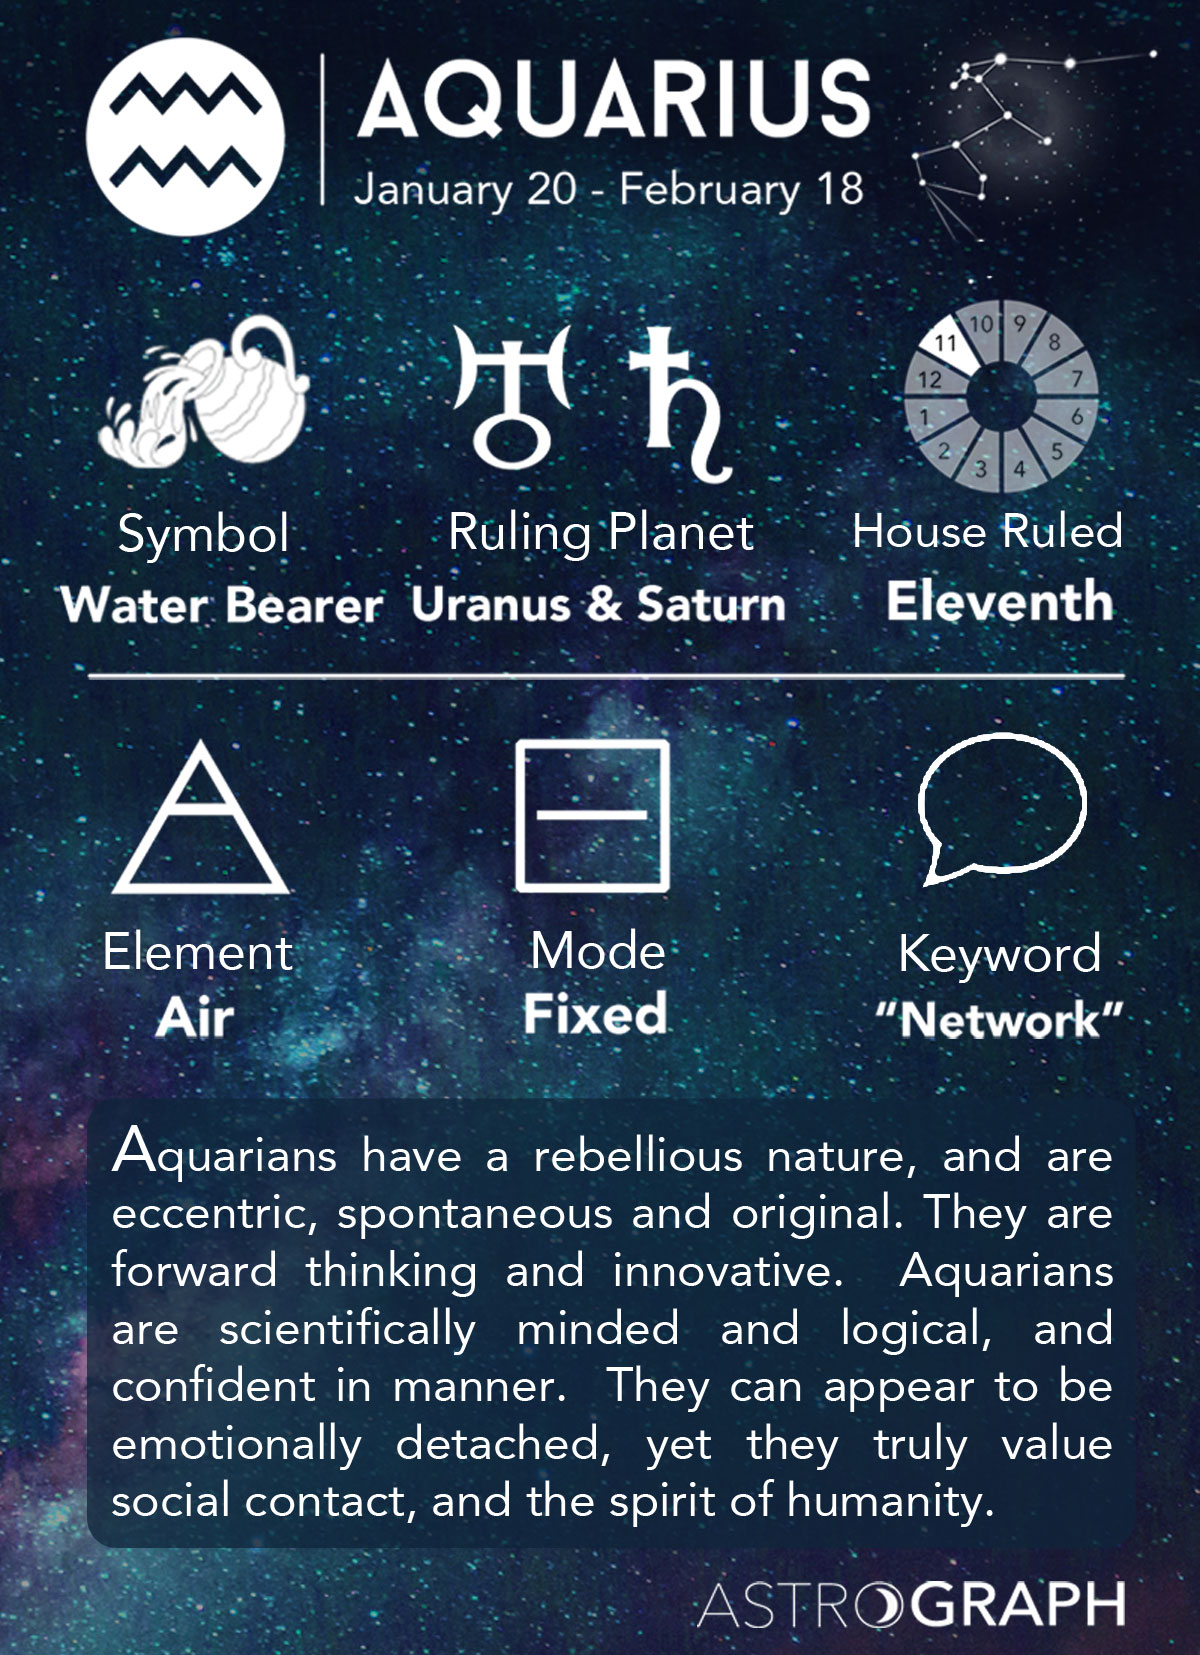 What element is Aquarius compatible with?